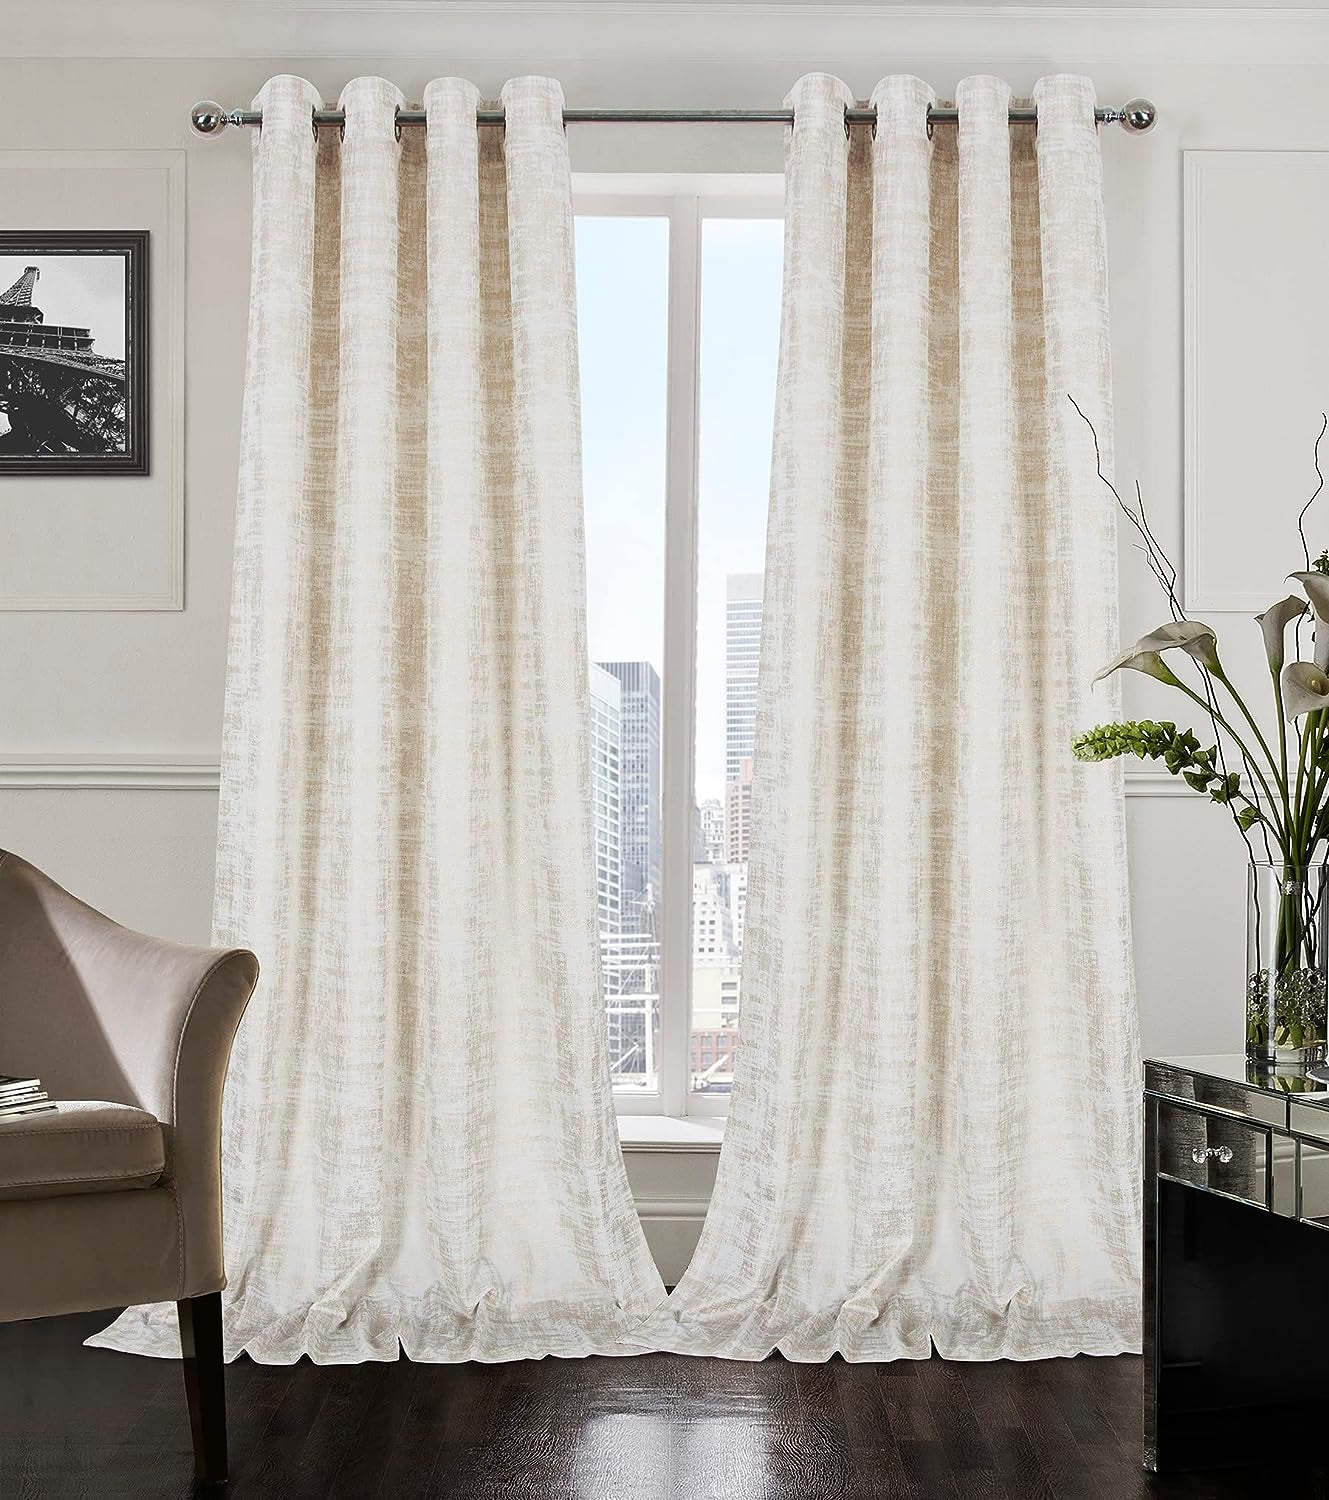 Always4U Soft Velvet Curtains 95 Inch Length Luxury Bedroom Curtains Gold Foil Print Window Curtains for Living Room 1 Panel White  always4u White (Gold Print) 2 Panels: 52''W*108''L 